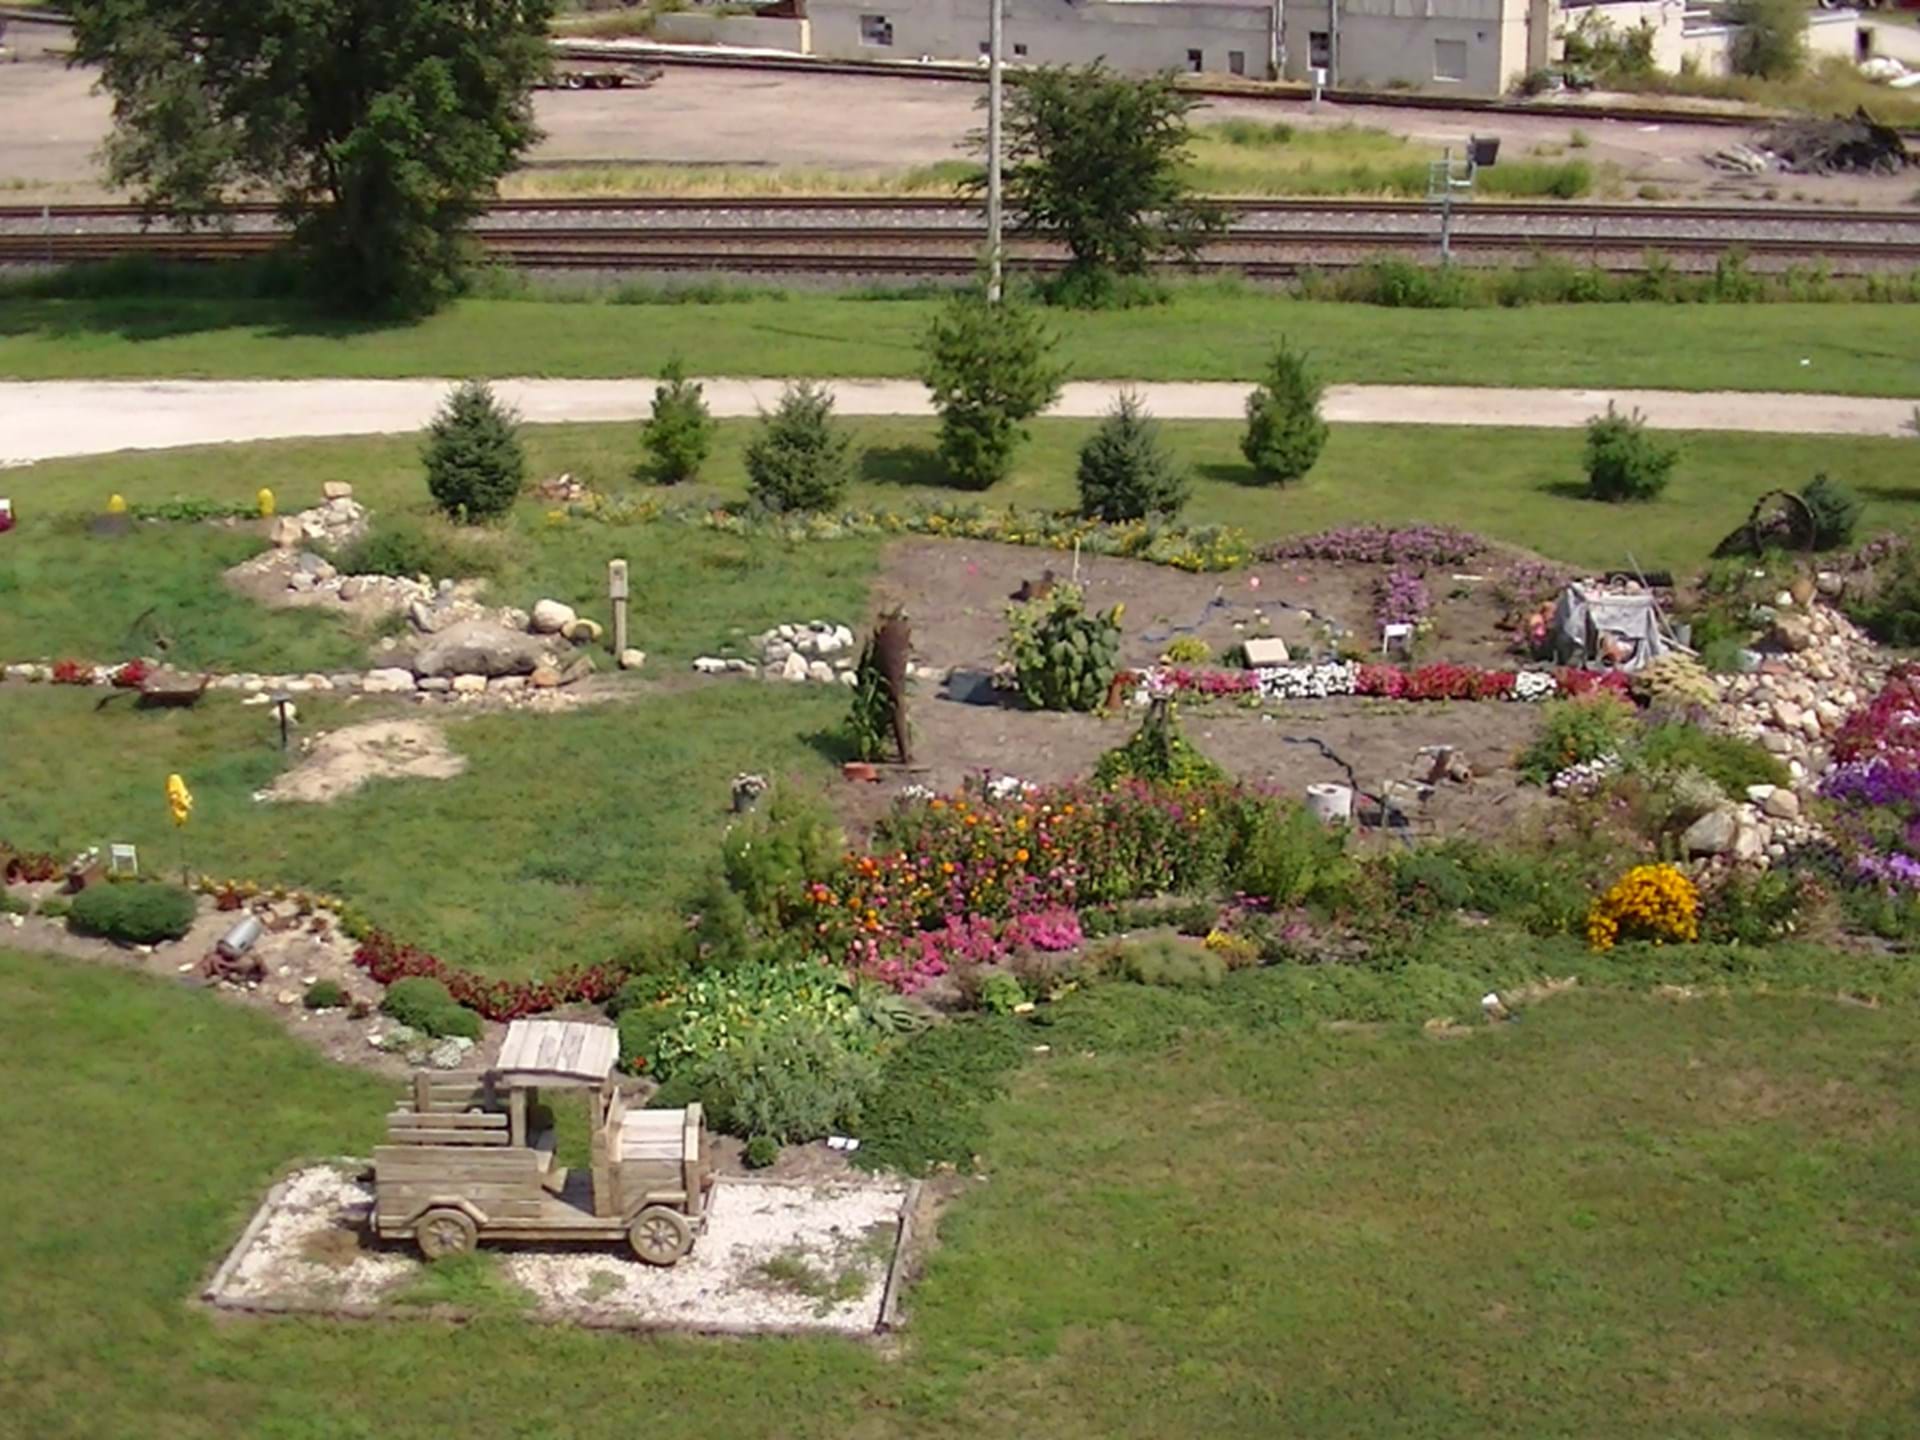 Lincoln Highway Garden as planted in 2015 